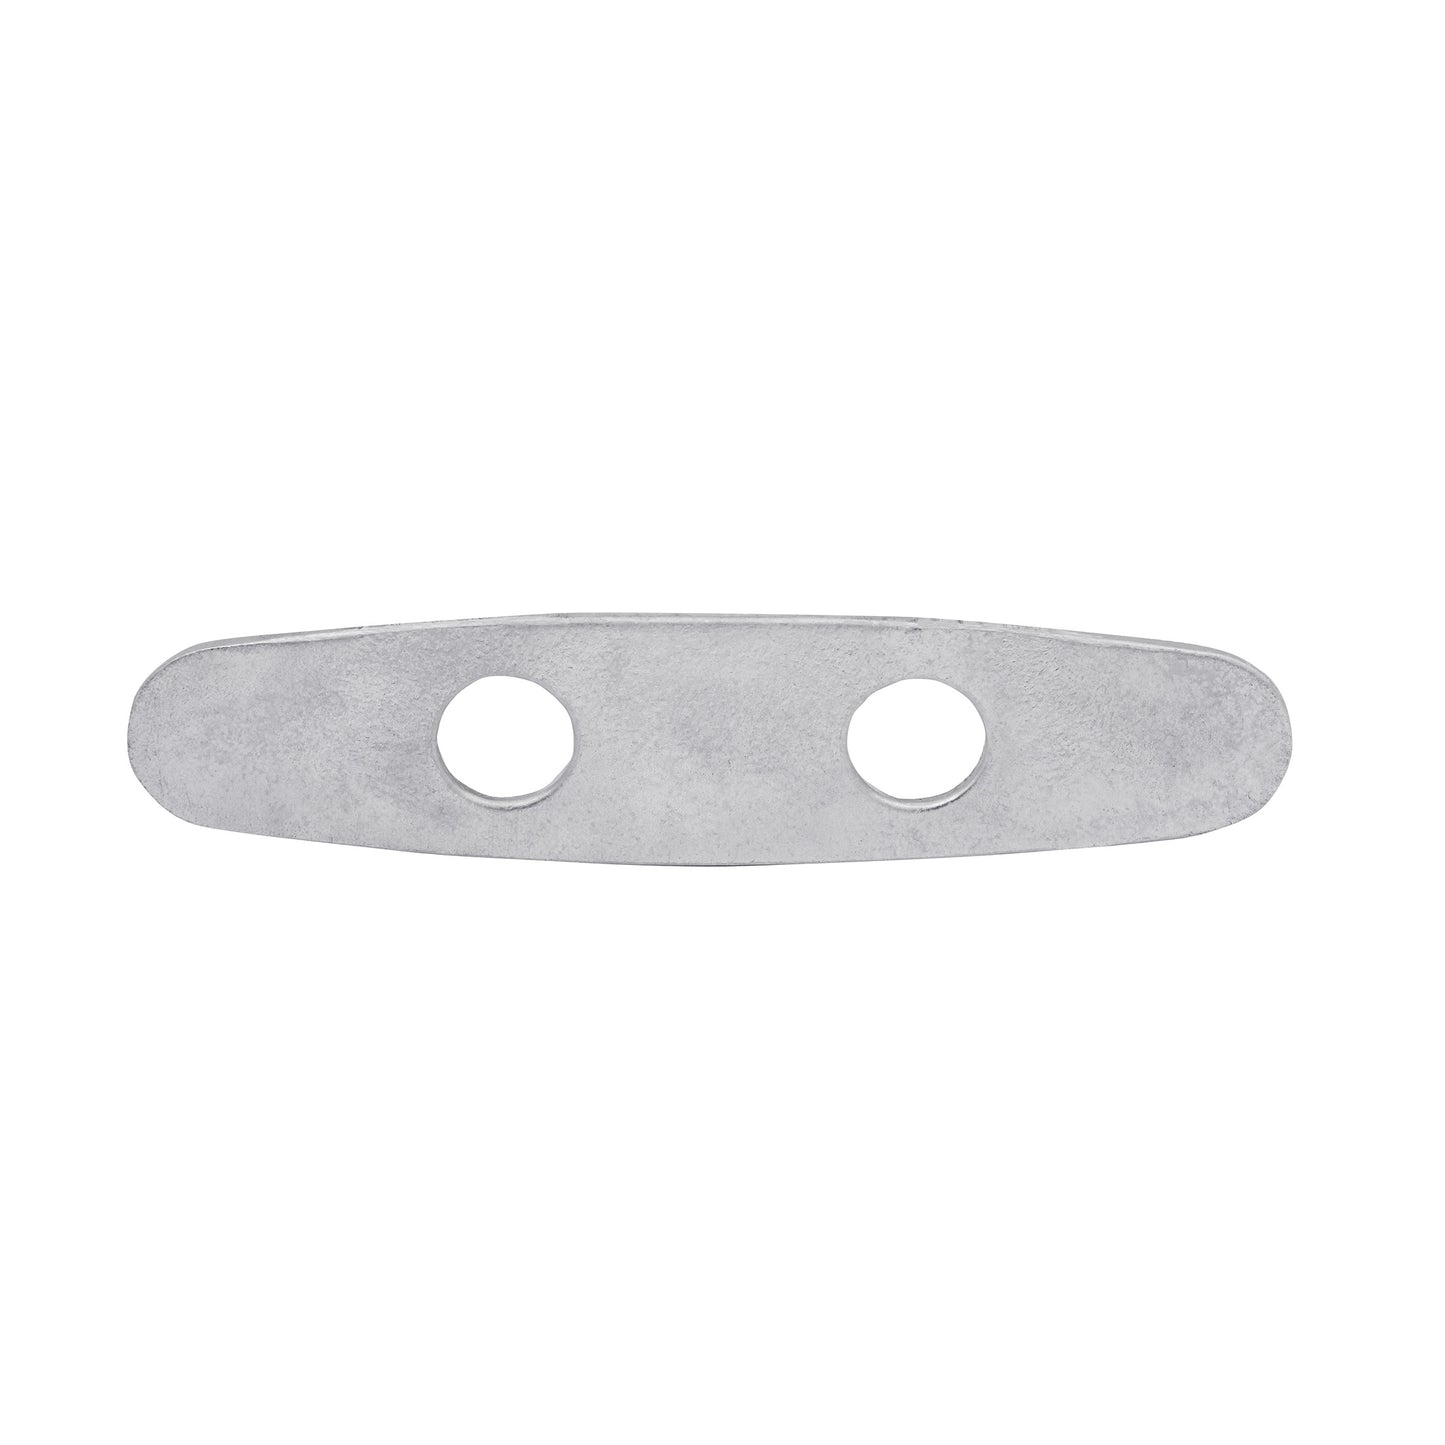 Backing Plate For 8" Pull Up Cleat - 7710BP